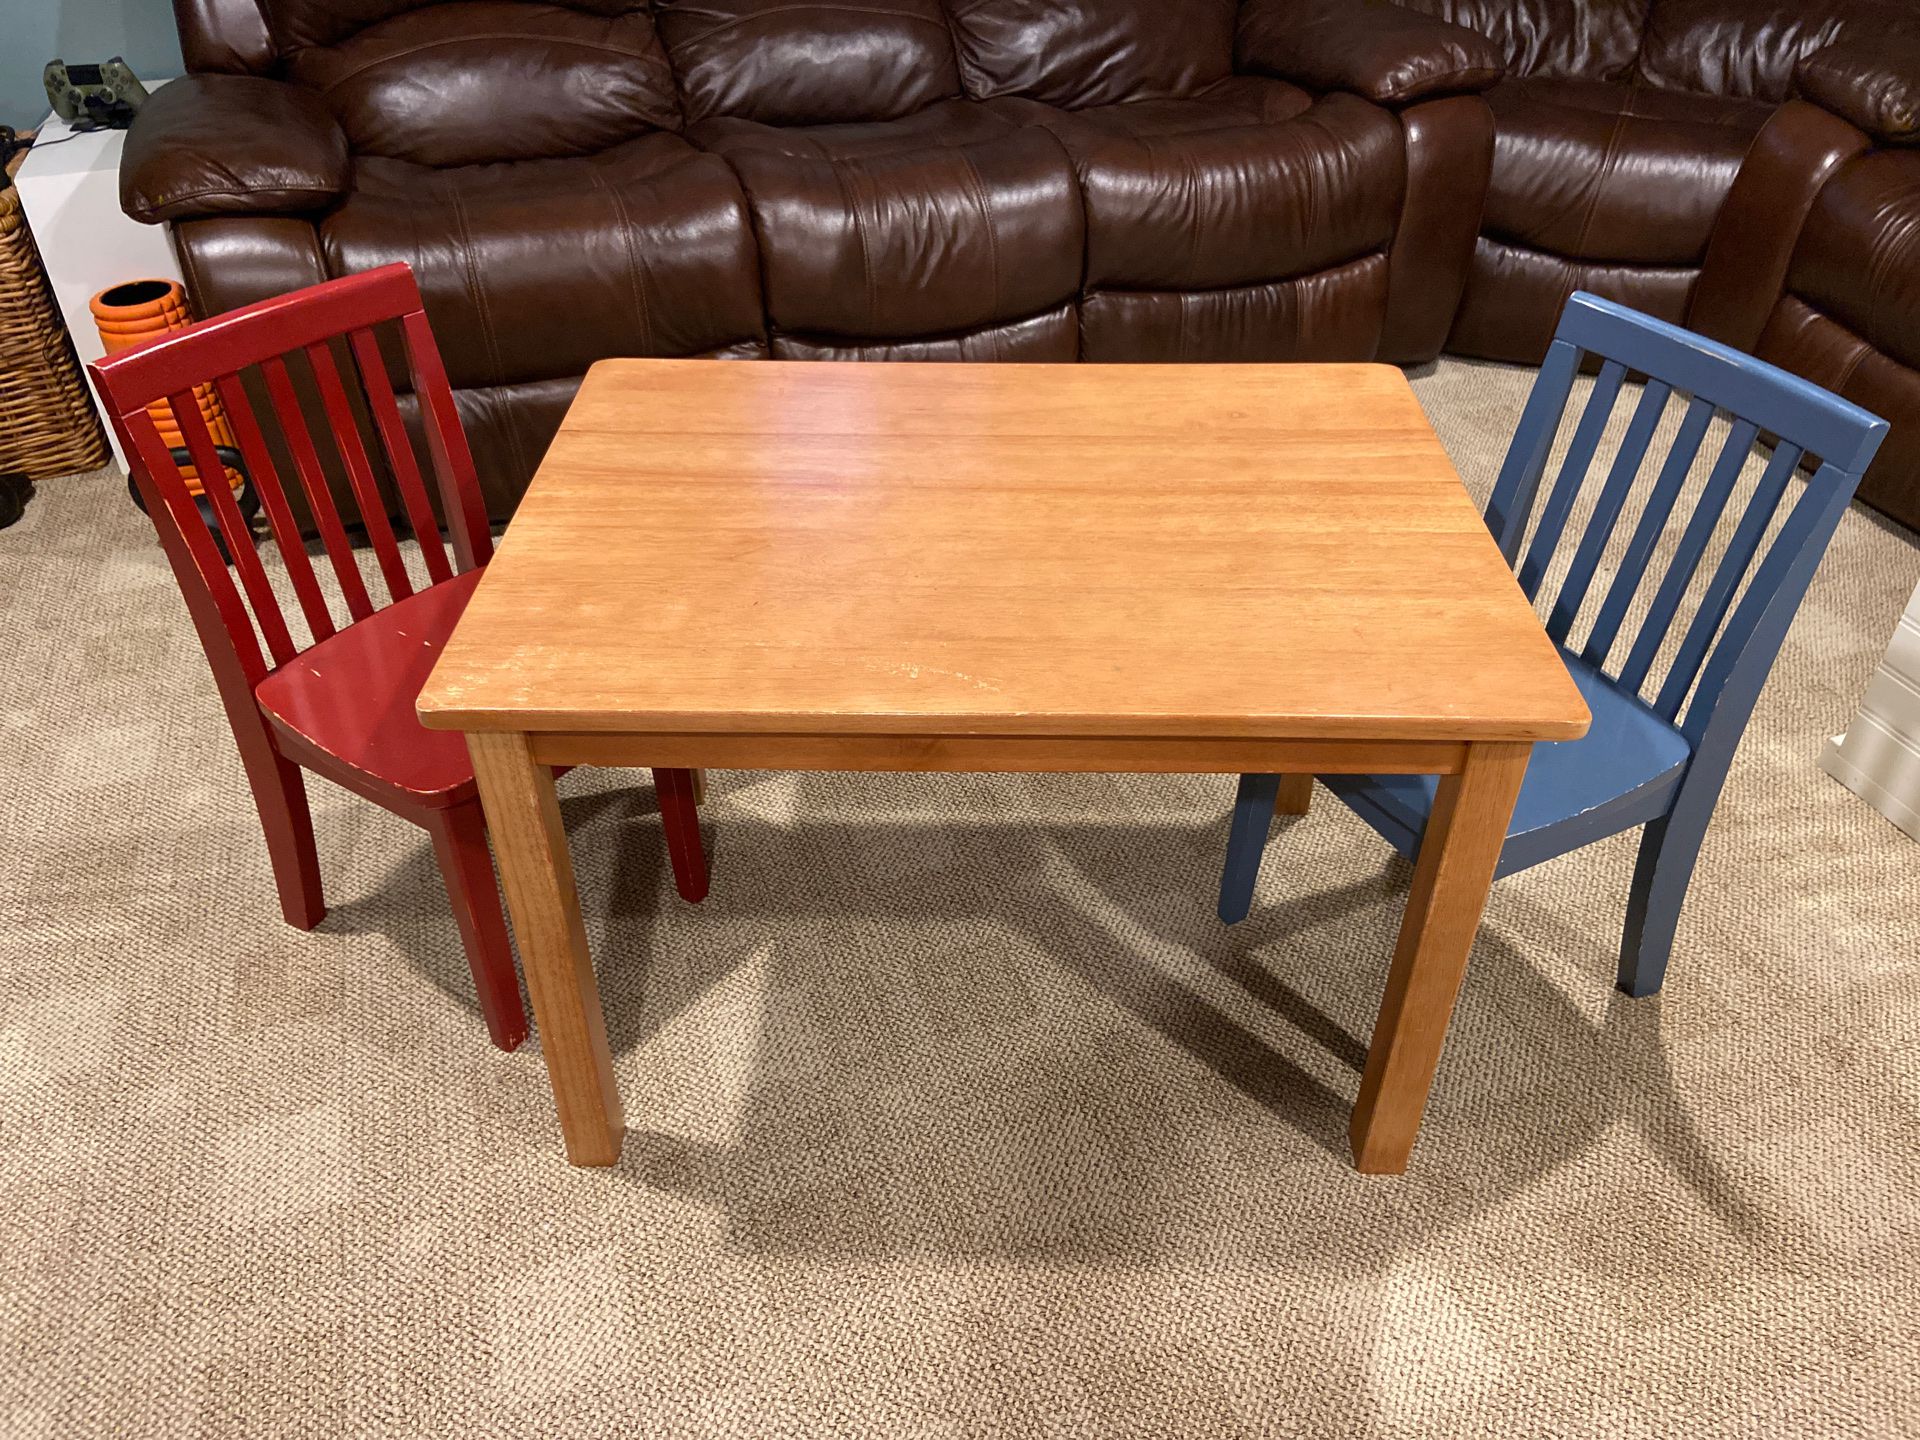 Pottery Barn Kids Caroline Table and Two Chairs